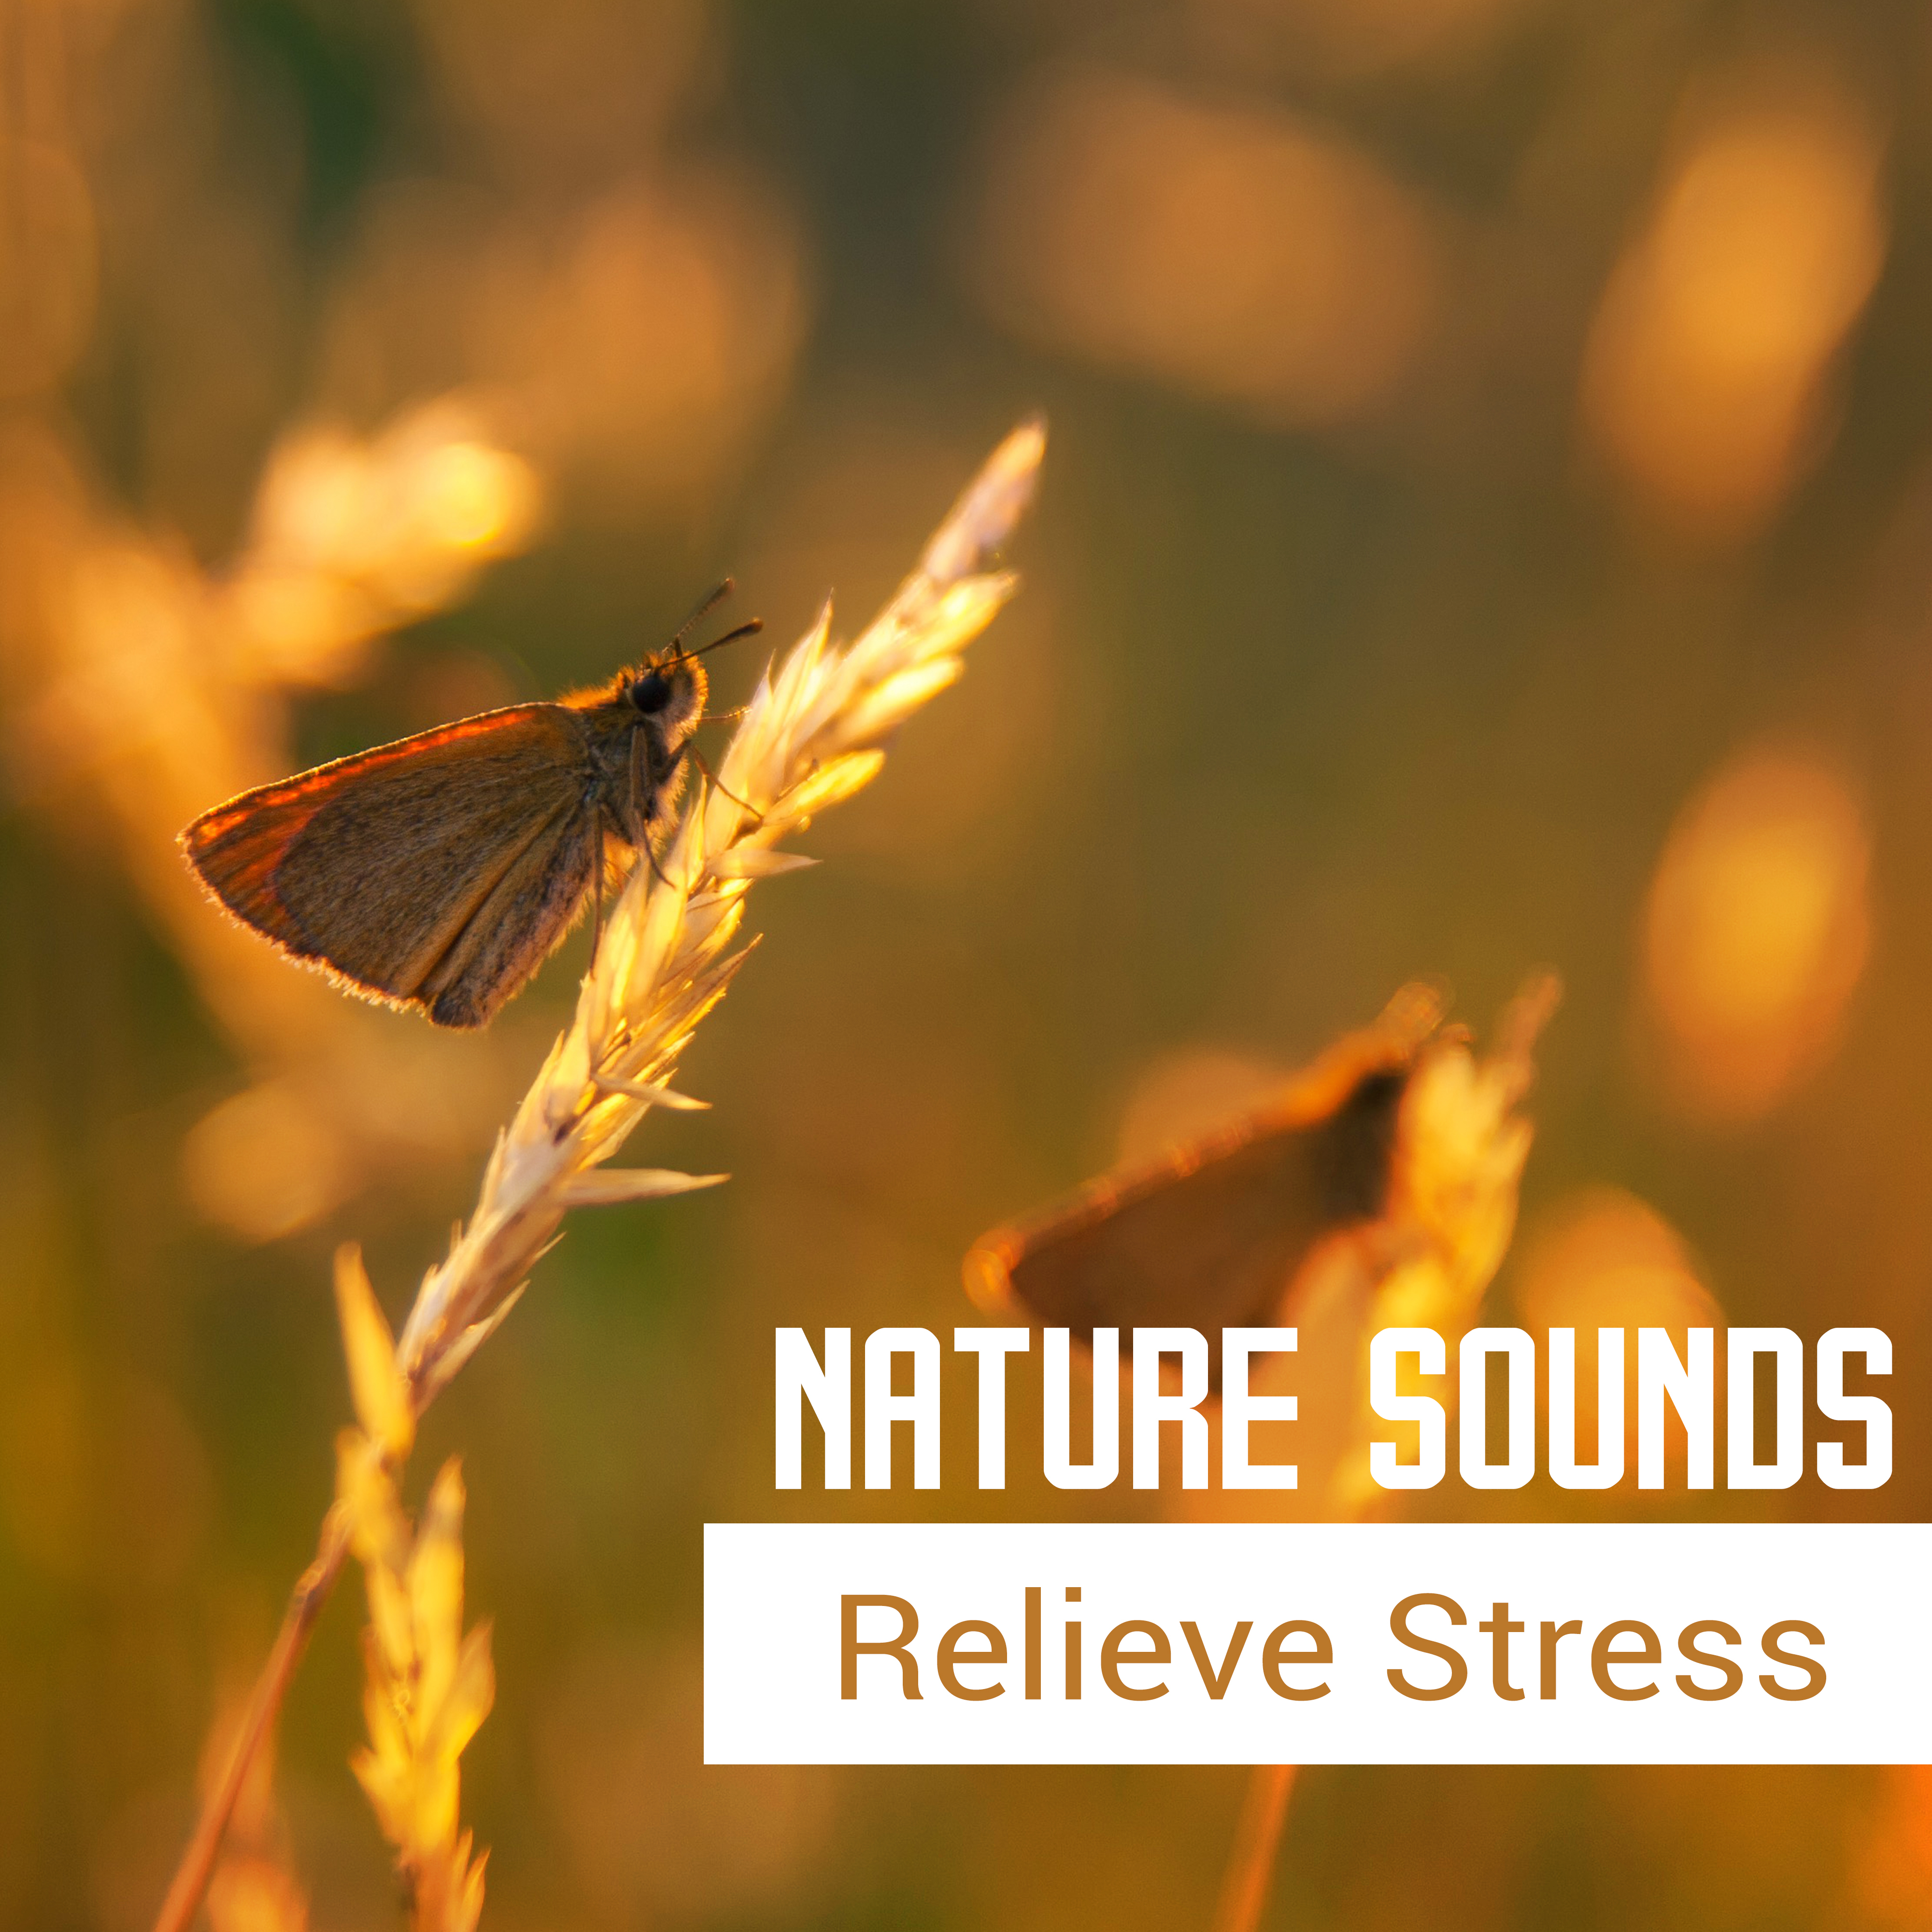 Nature Sounds Relieve Stress  Pure Relaxation, Gentle Melodies, Sounds of Sea, Restful Sleep, Meditate